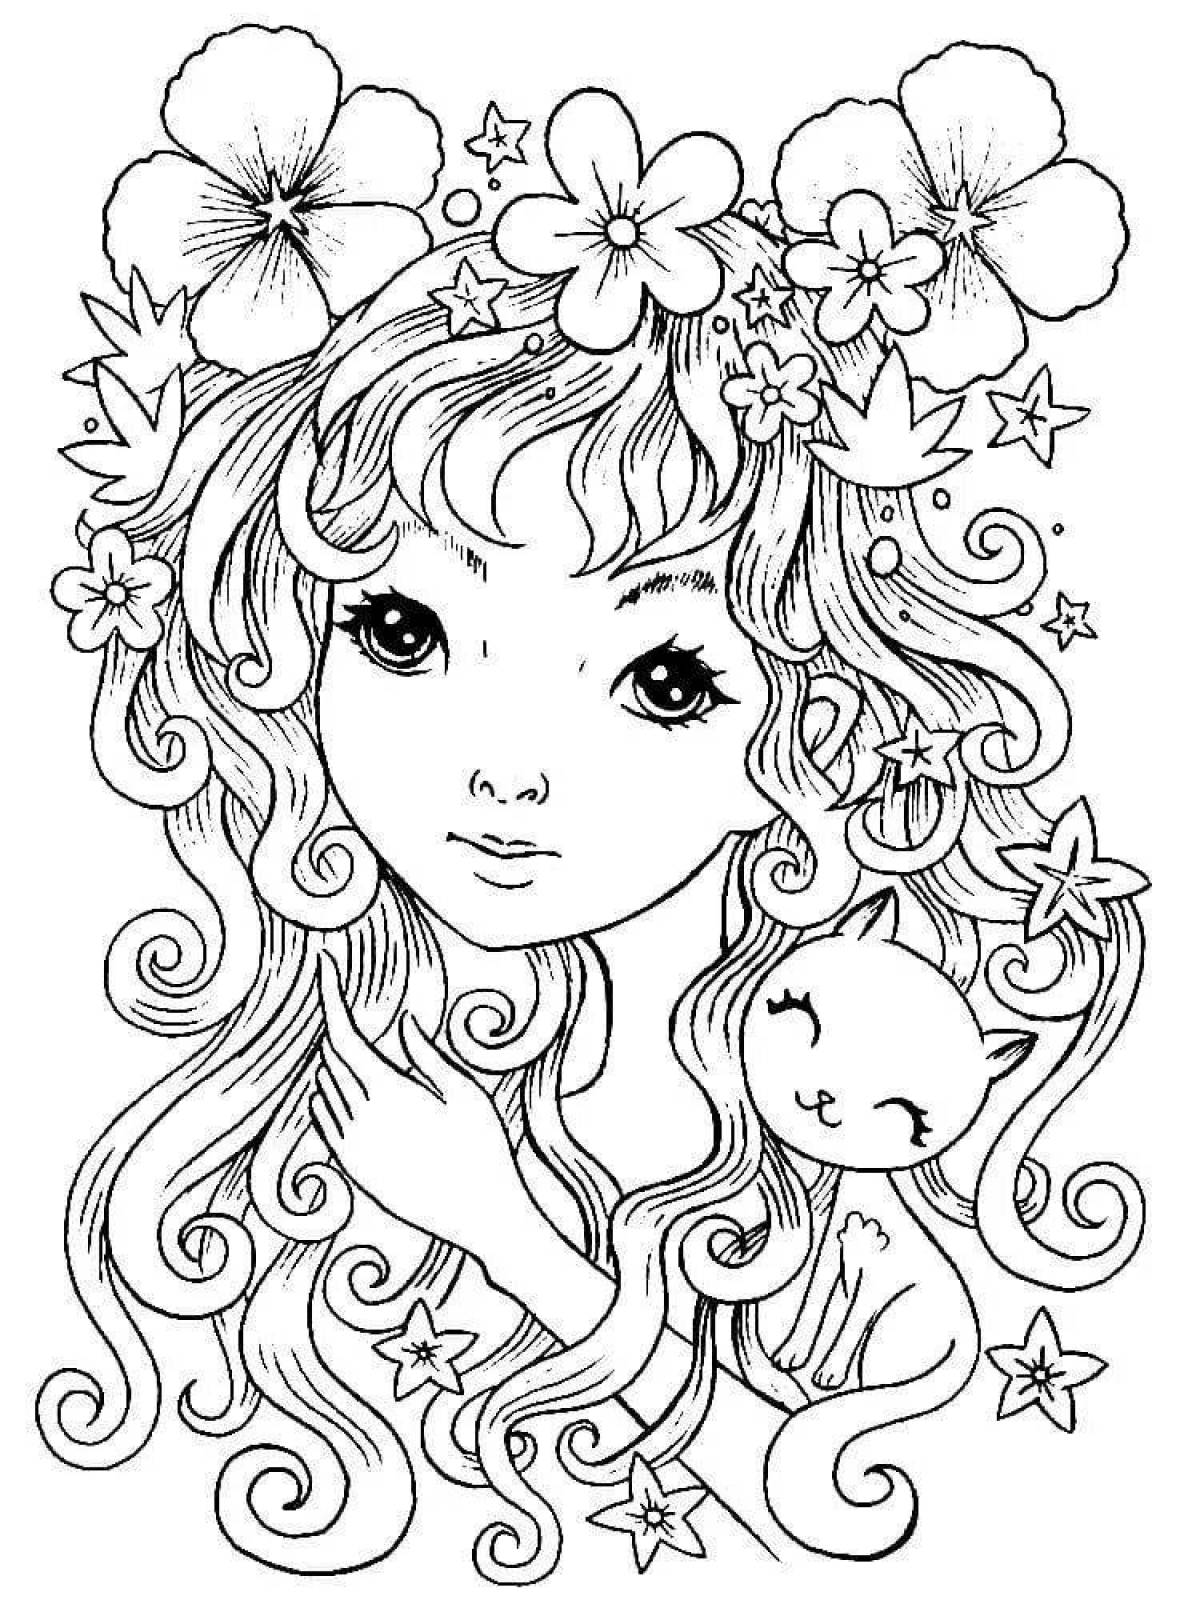 Live coloring for girls 8-10 years old